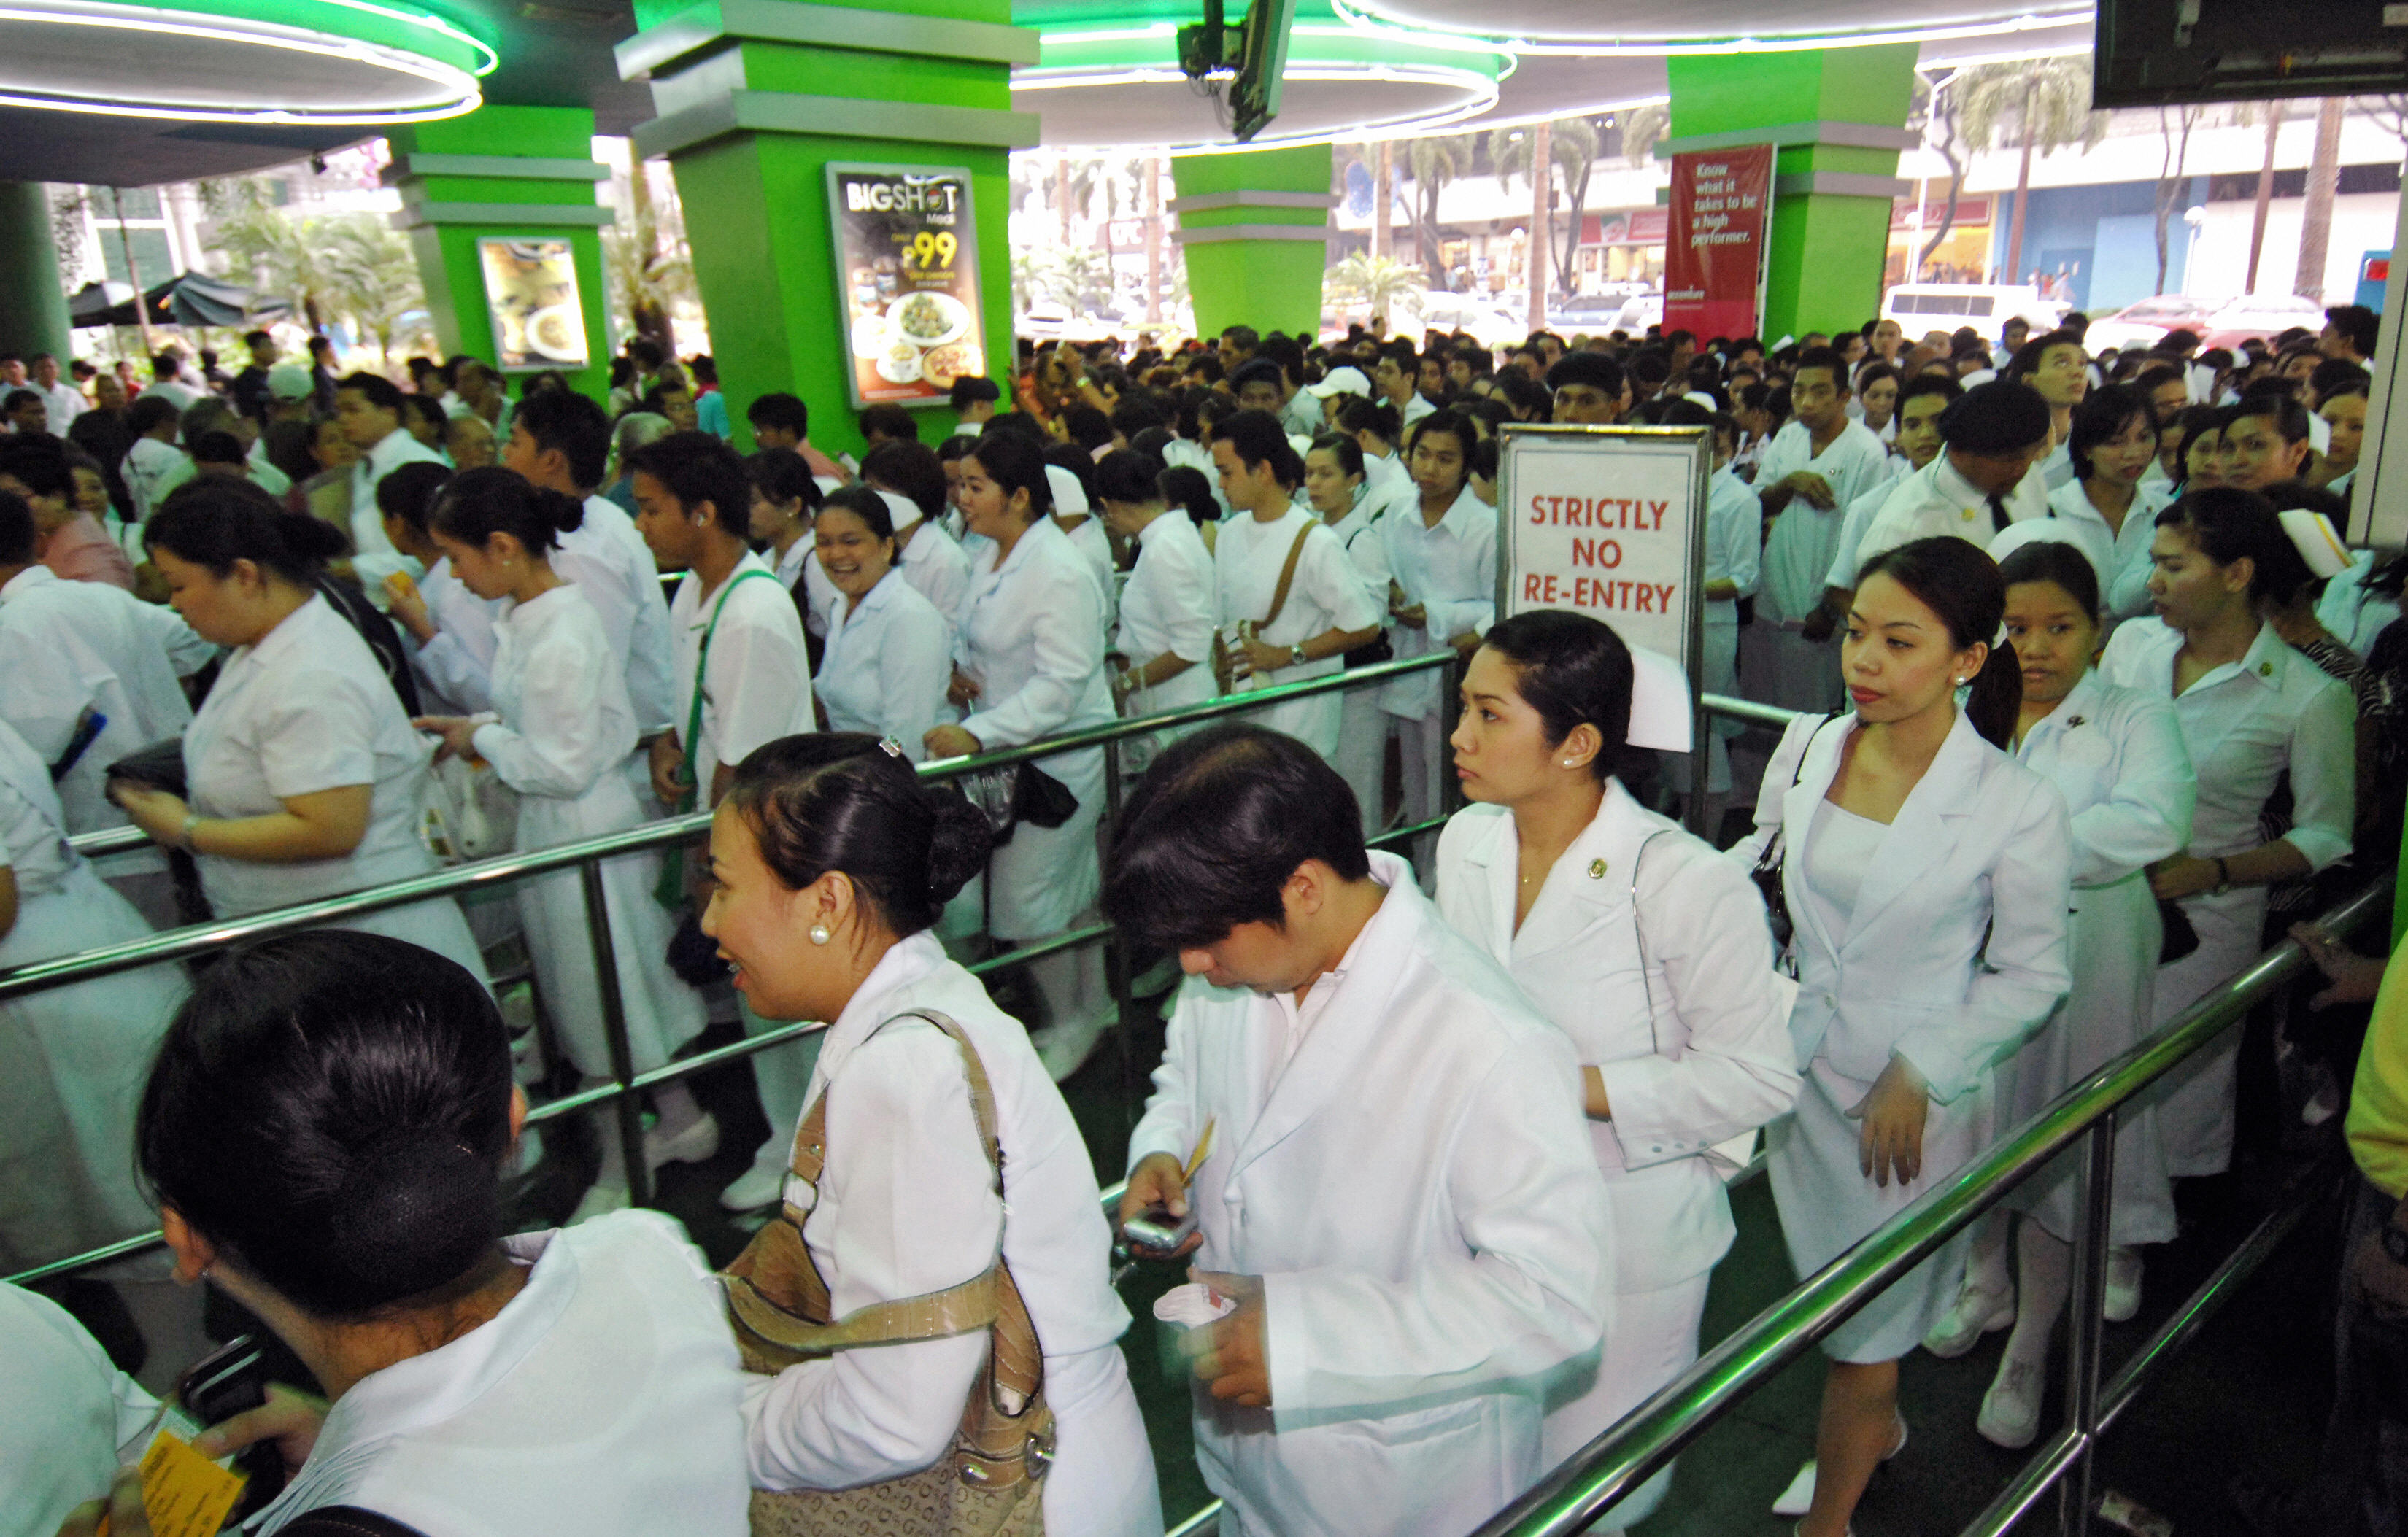 Hundreds of nurses arrive at the Araneta coliseum in Manila, 02 October 2007 to attend official oath taking ceremonies after passing the June 2007 government licensure examination, where 31,275 successful examinees from the more than 64,000 passed the tests conducted nationwide. (ROMEO GACAD—AFP/Getty Images)